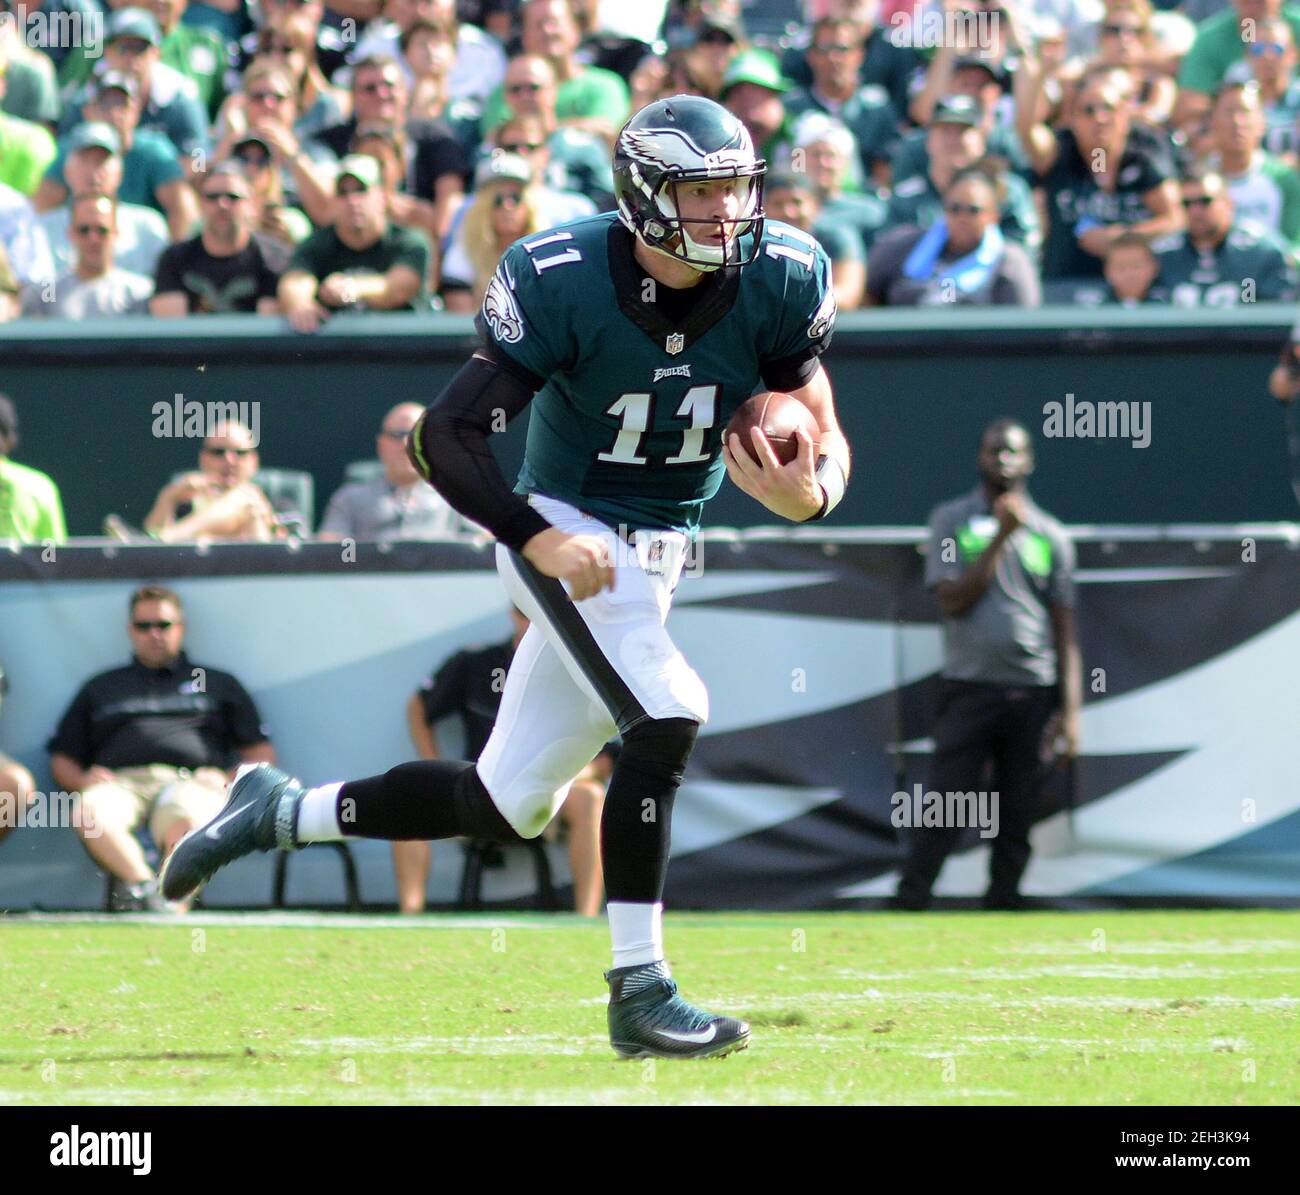 Philadelphia, United States. 11th Sep, 2016. FILE PHOTO: In this September 11, 2016 file photo, Philadelphia Eagles quarterback Carson Wentz #11 runs with the ball against the Cleveland Browns in the fourth quarter Sunday, September 11, 2016 at Lincoln Financial Field in Philadelphia, Pennsylvania. Wentz was traded February 18, 2021, for a second and third round draft pick, to the Indianapolis Colts, reuniting him with Colts head coach and former Philadelphia Eagles offensive coordinator, Frank Reich. ( Credit: William Thomas Cain/Alamy Live News Stock Photo